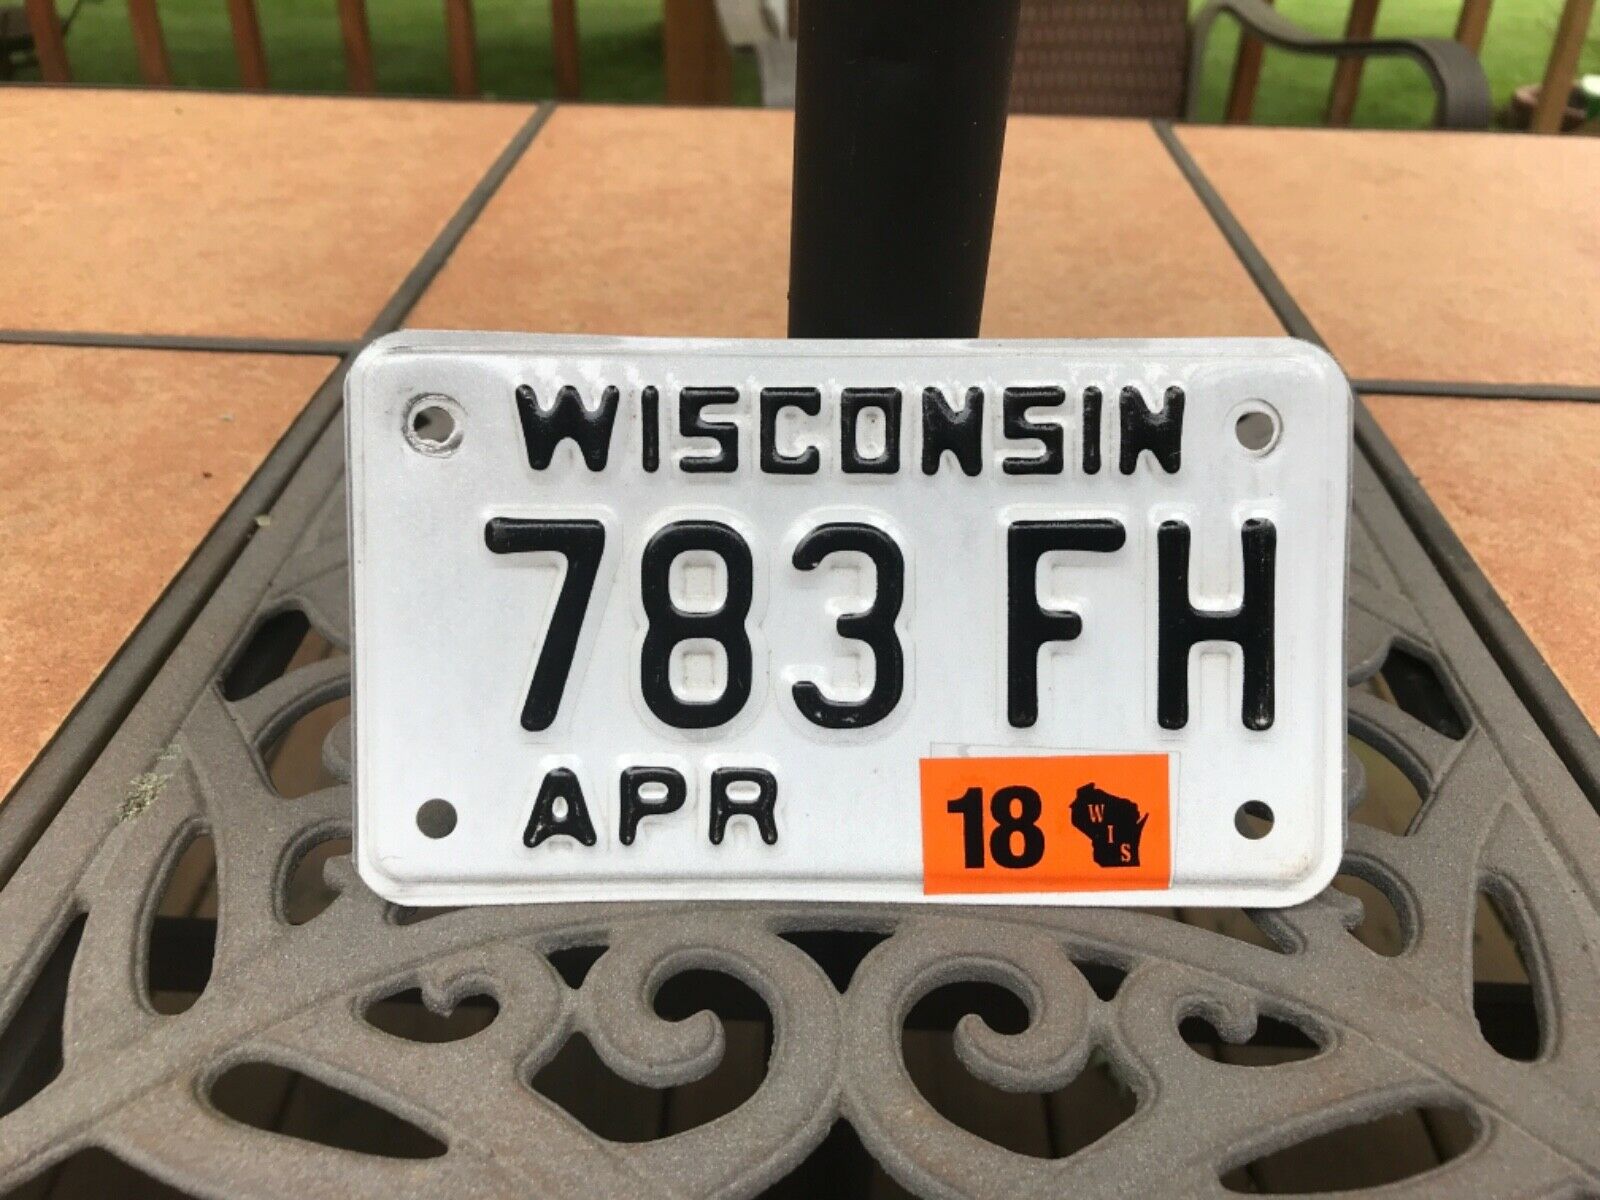 Black On White Wisconsin Motorcycle Bike Cycle License Plate 783-fh